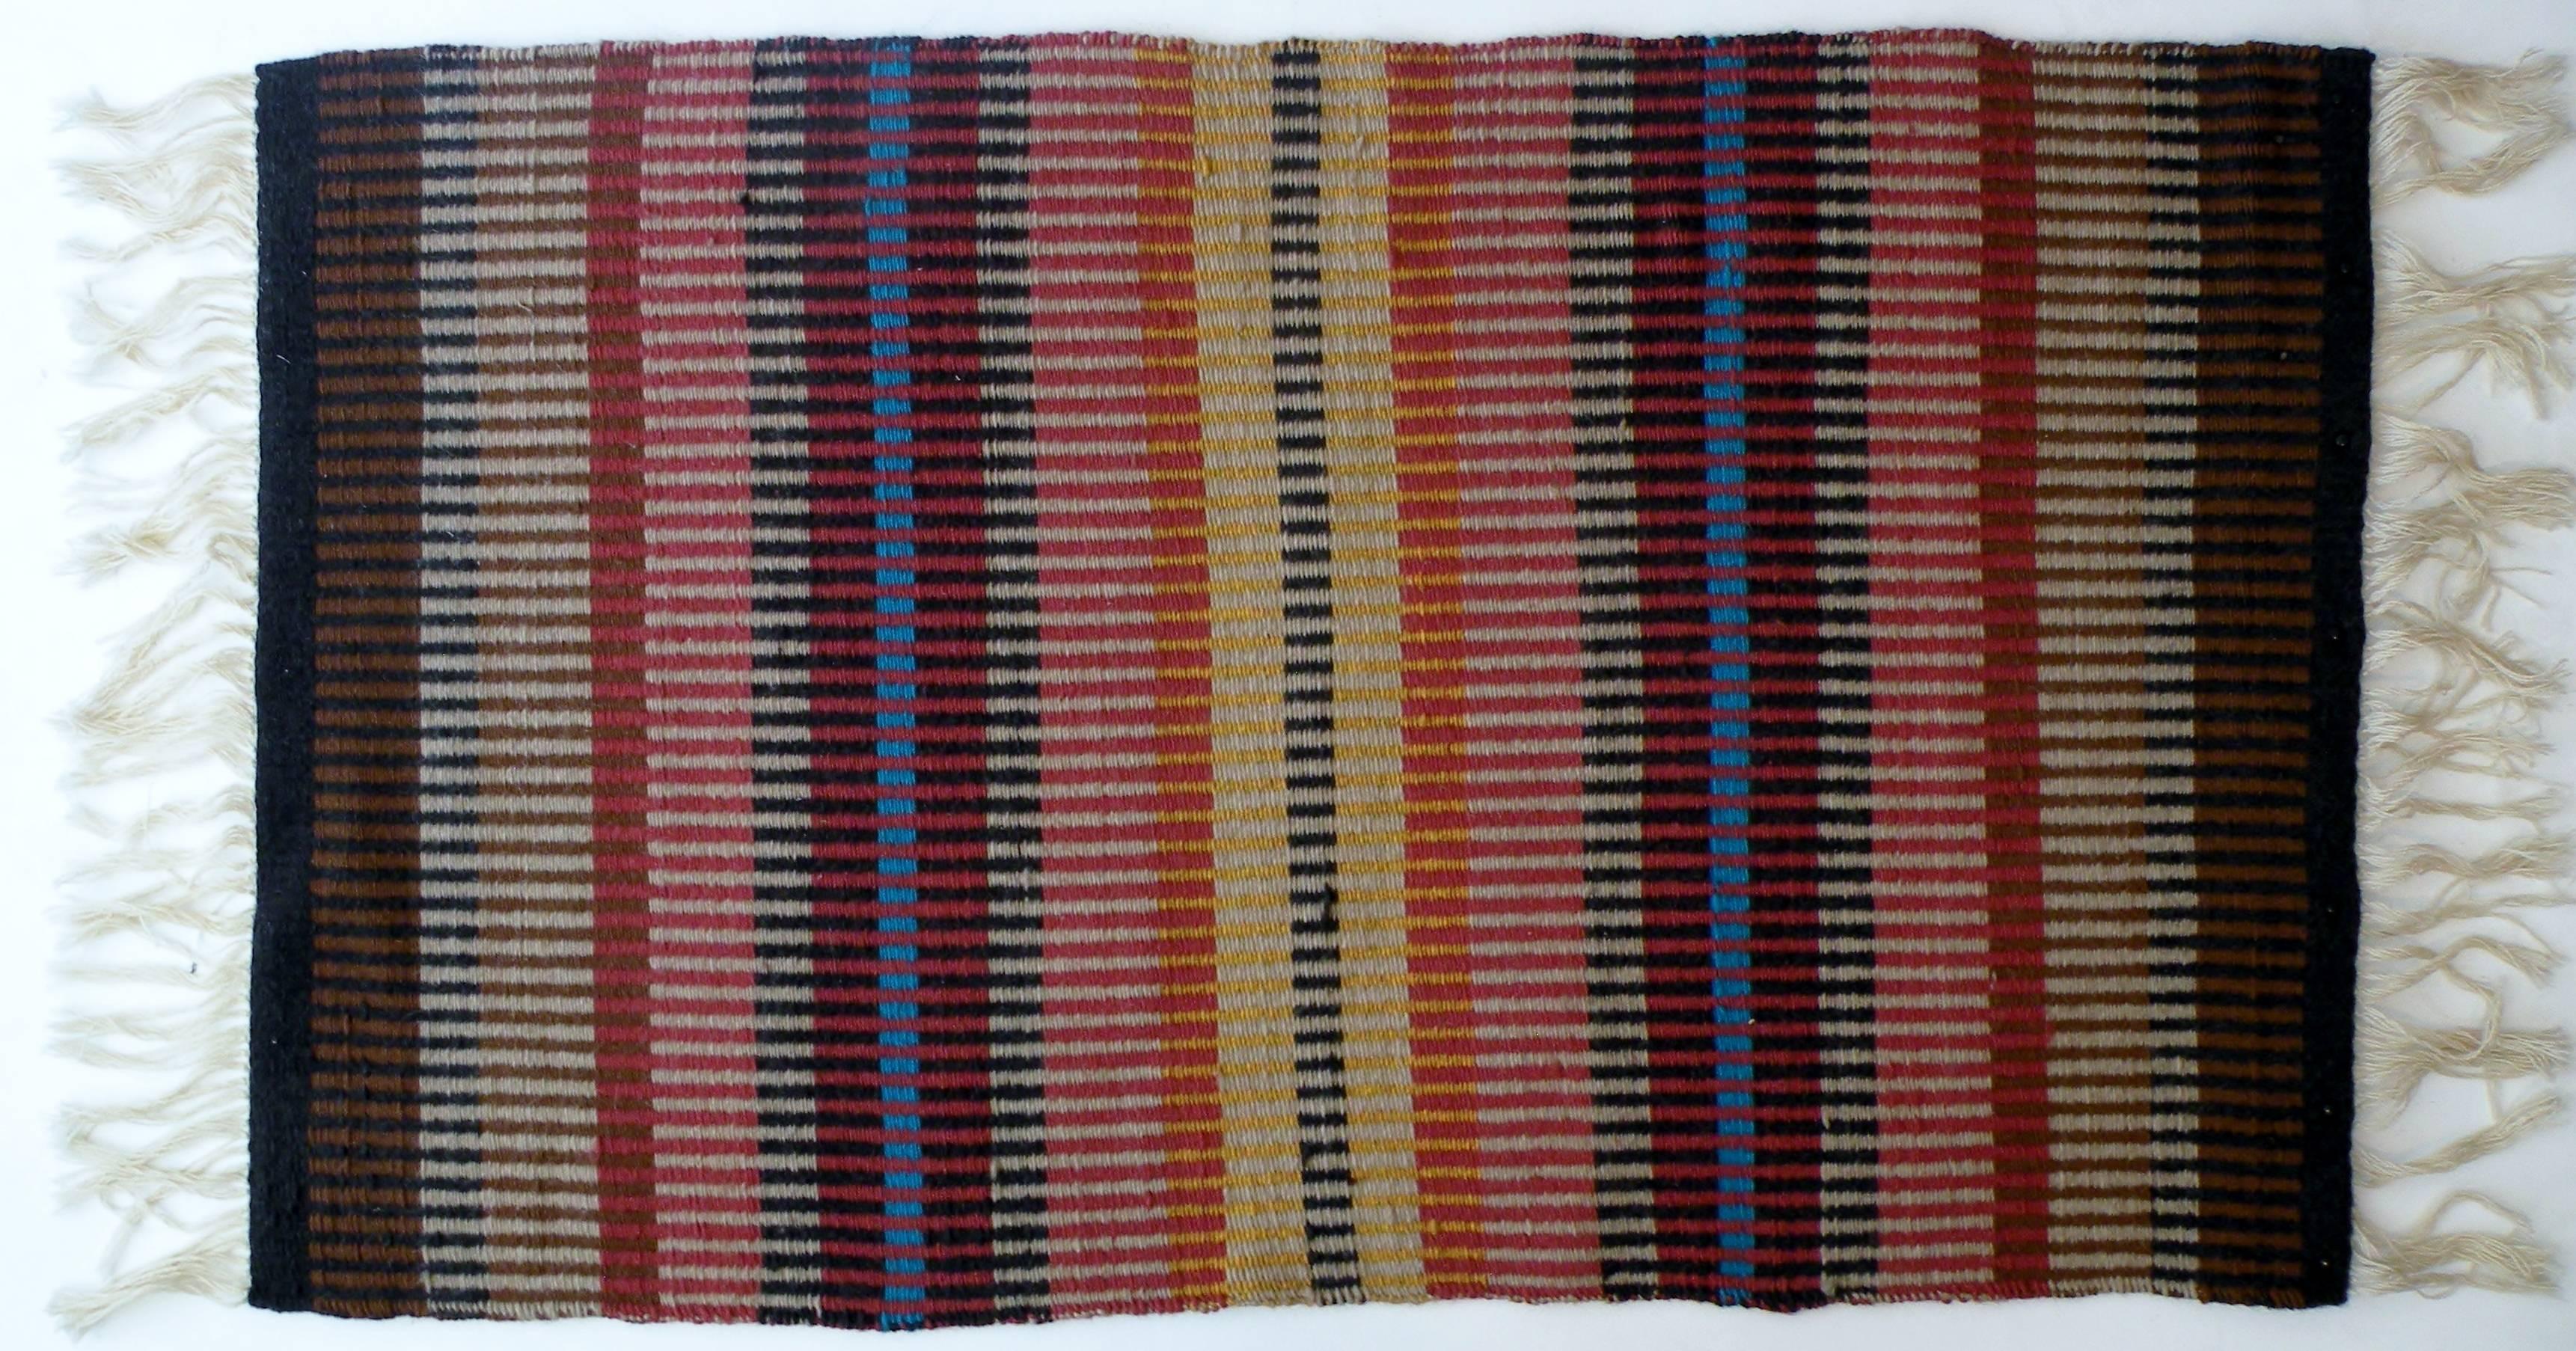 20th Century California Craft Linear Abstract Woven Textile Bauhaus Inspired Rug